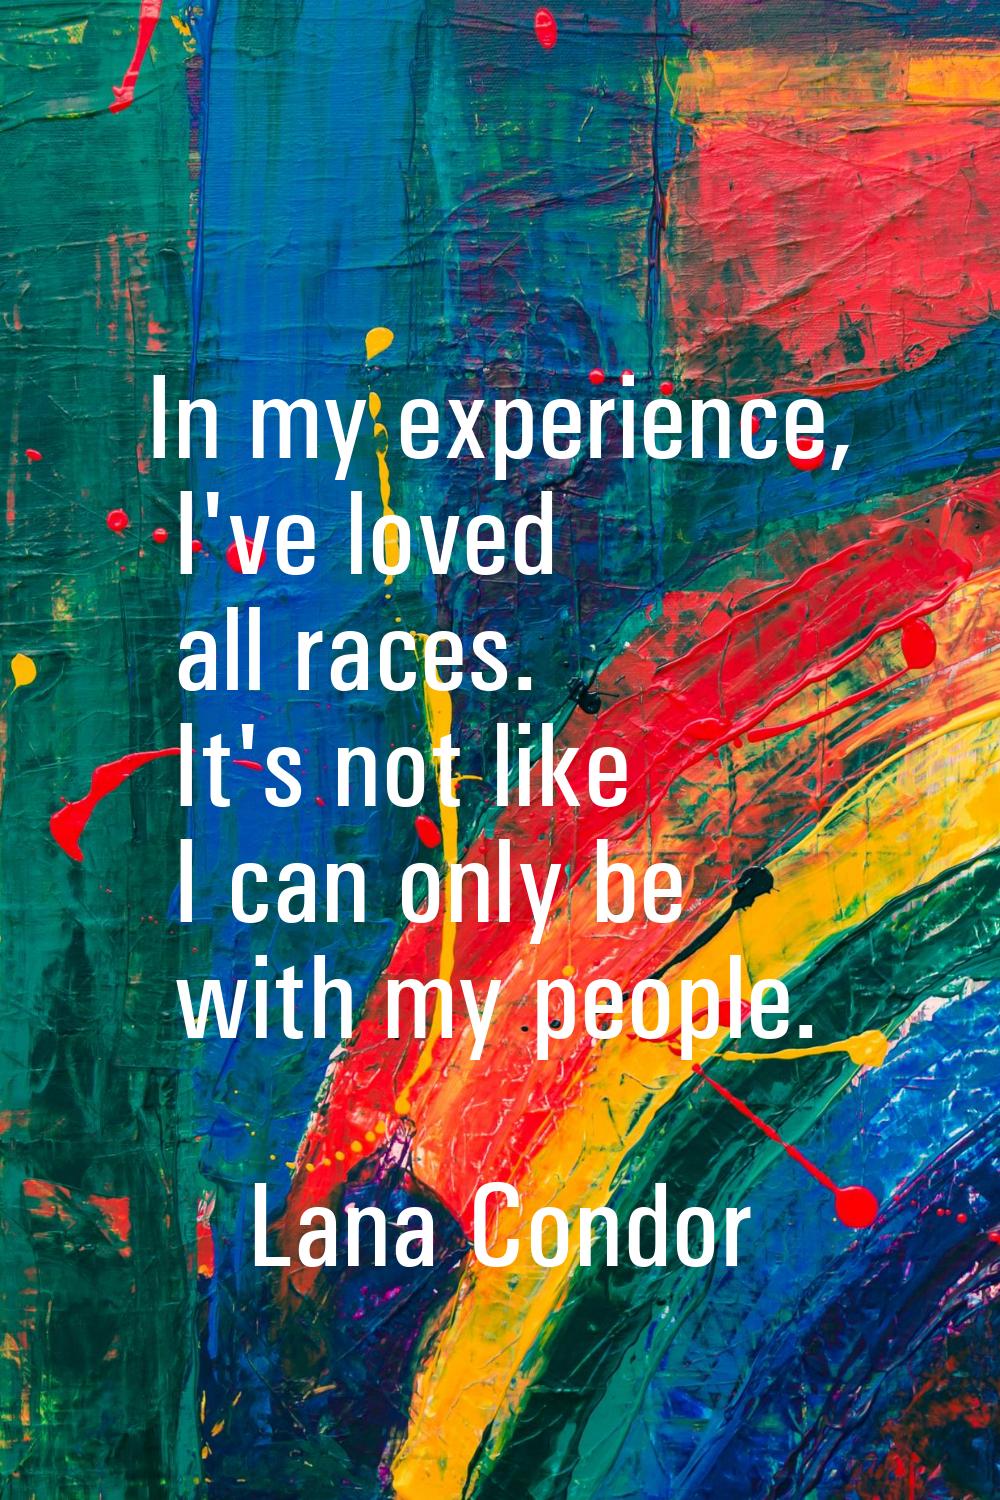 In my experience, I've loved all races. It's not like I can only be with my people.